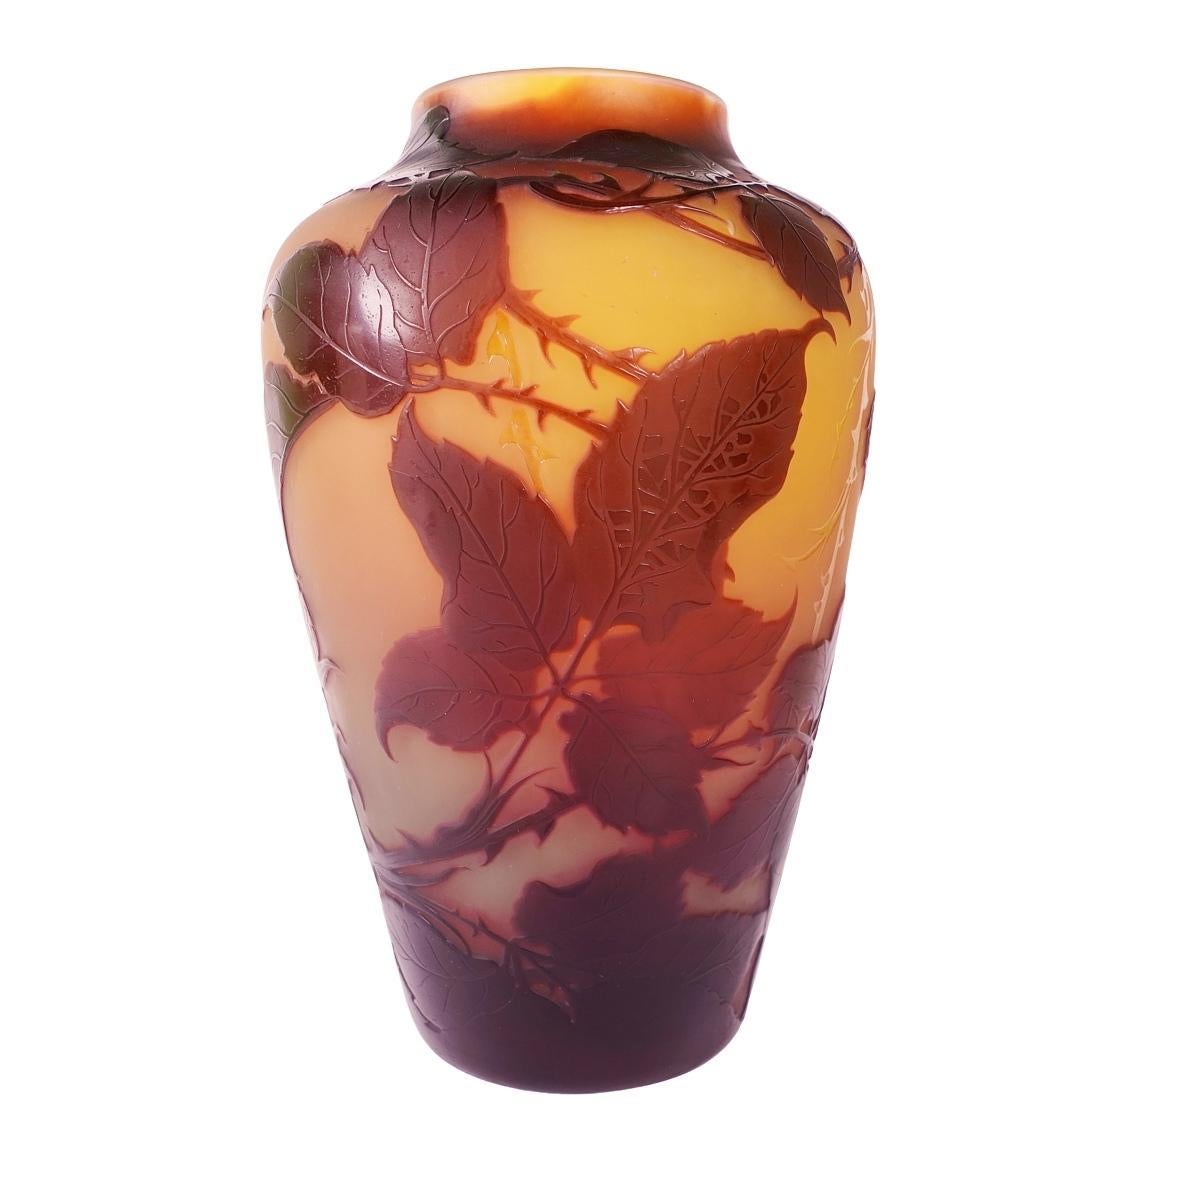 Offering this vintage D'Argental “Raspberries” cameo relief art glass vase. This acid etched and polished cameo vase has a detailed raspberry and foliage design in a deep chocolate over a reddish amber body. Vase is acid etched with extra 